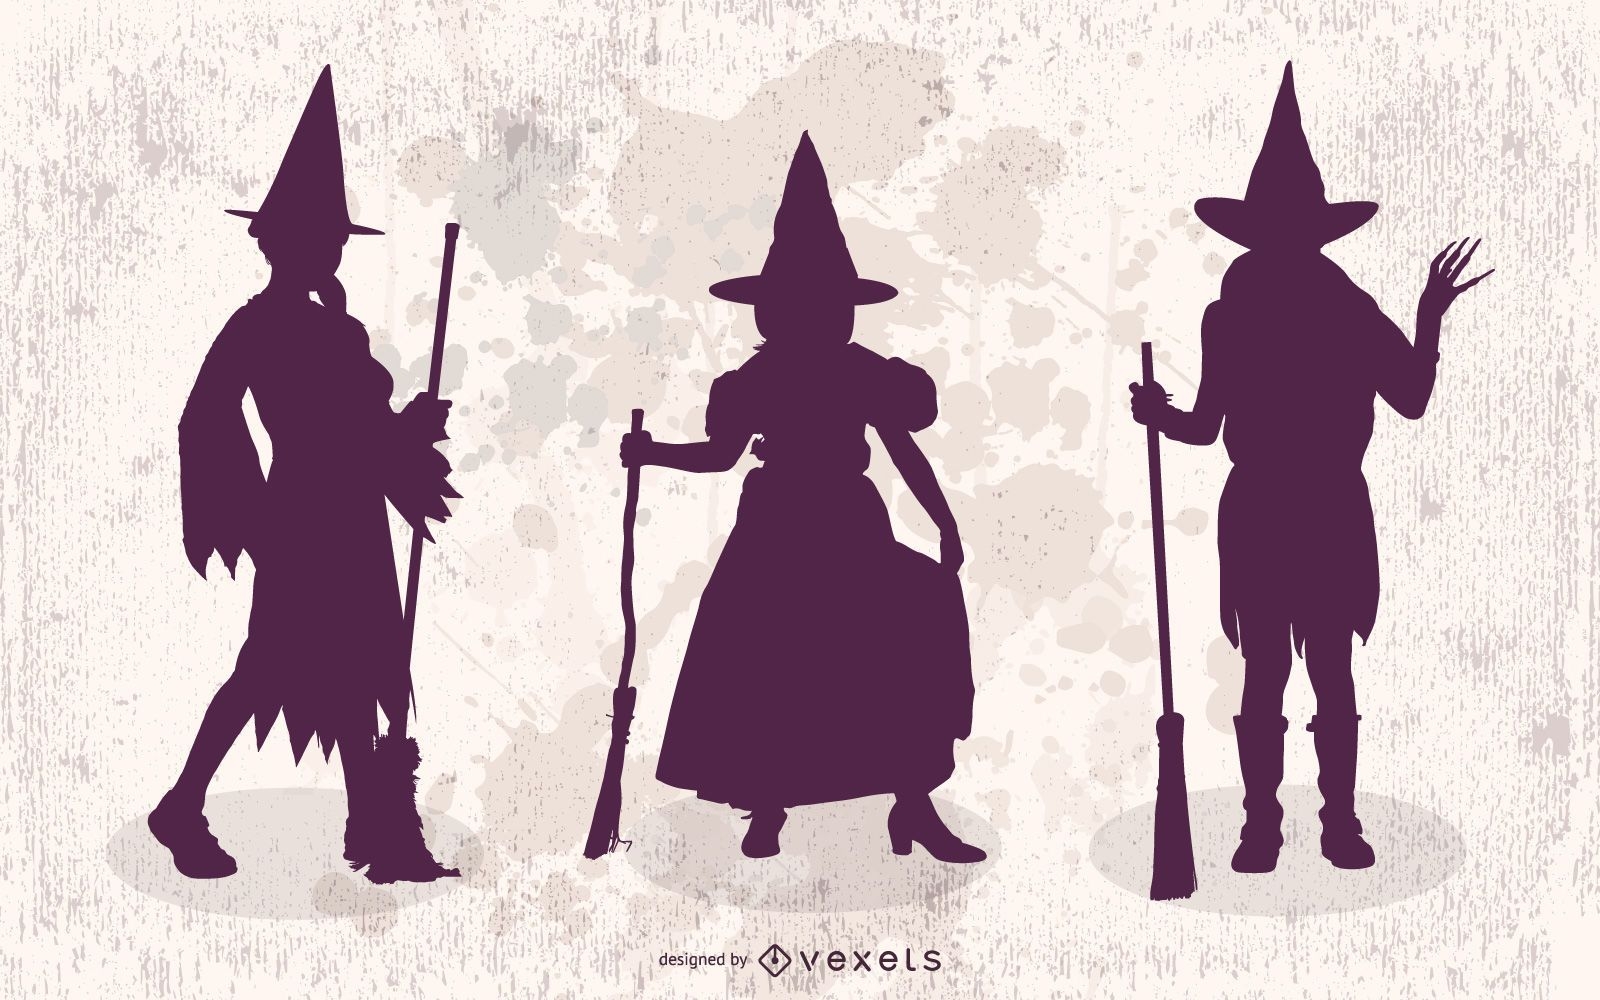 3 Girls in Halloween Witch Costumes